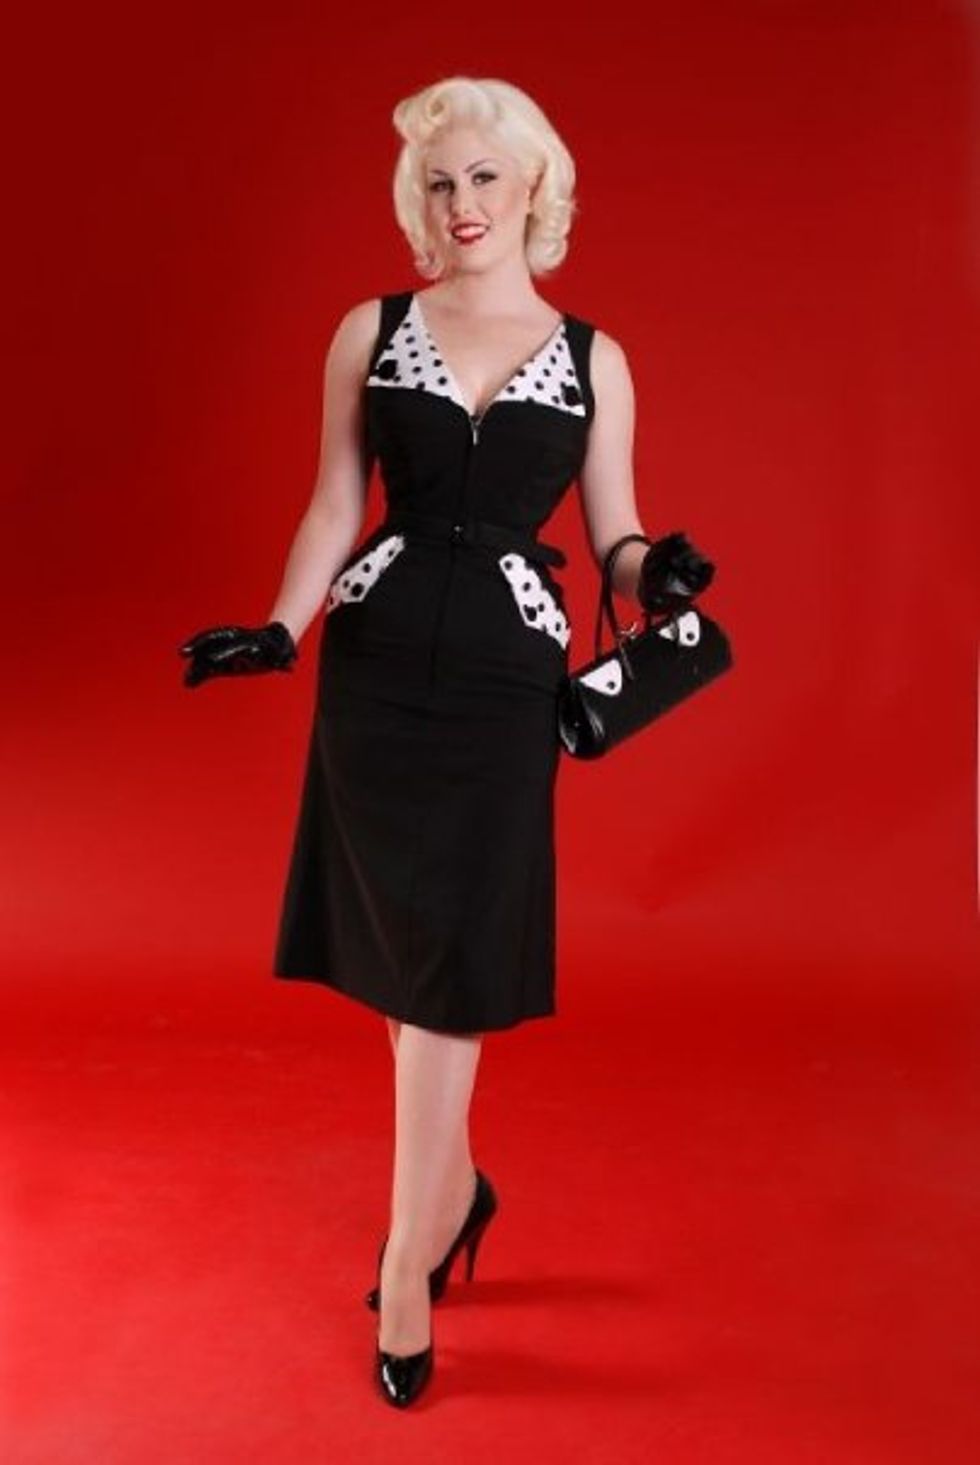 Vixens in Training: Perfect Your Pin-Up Style @ Bombshell Betty's Retro Styling Workshop